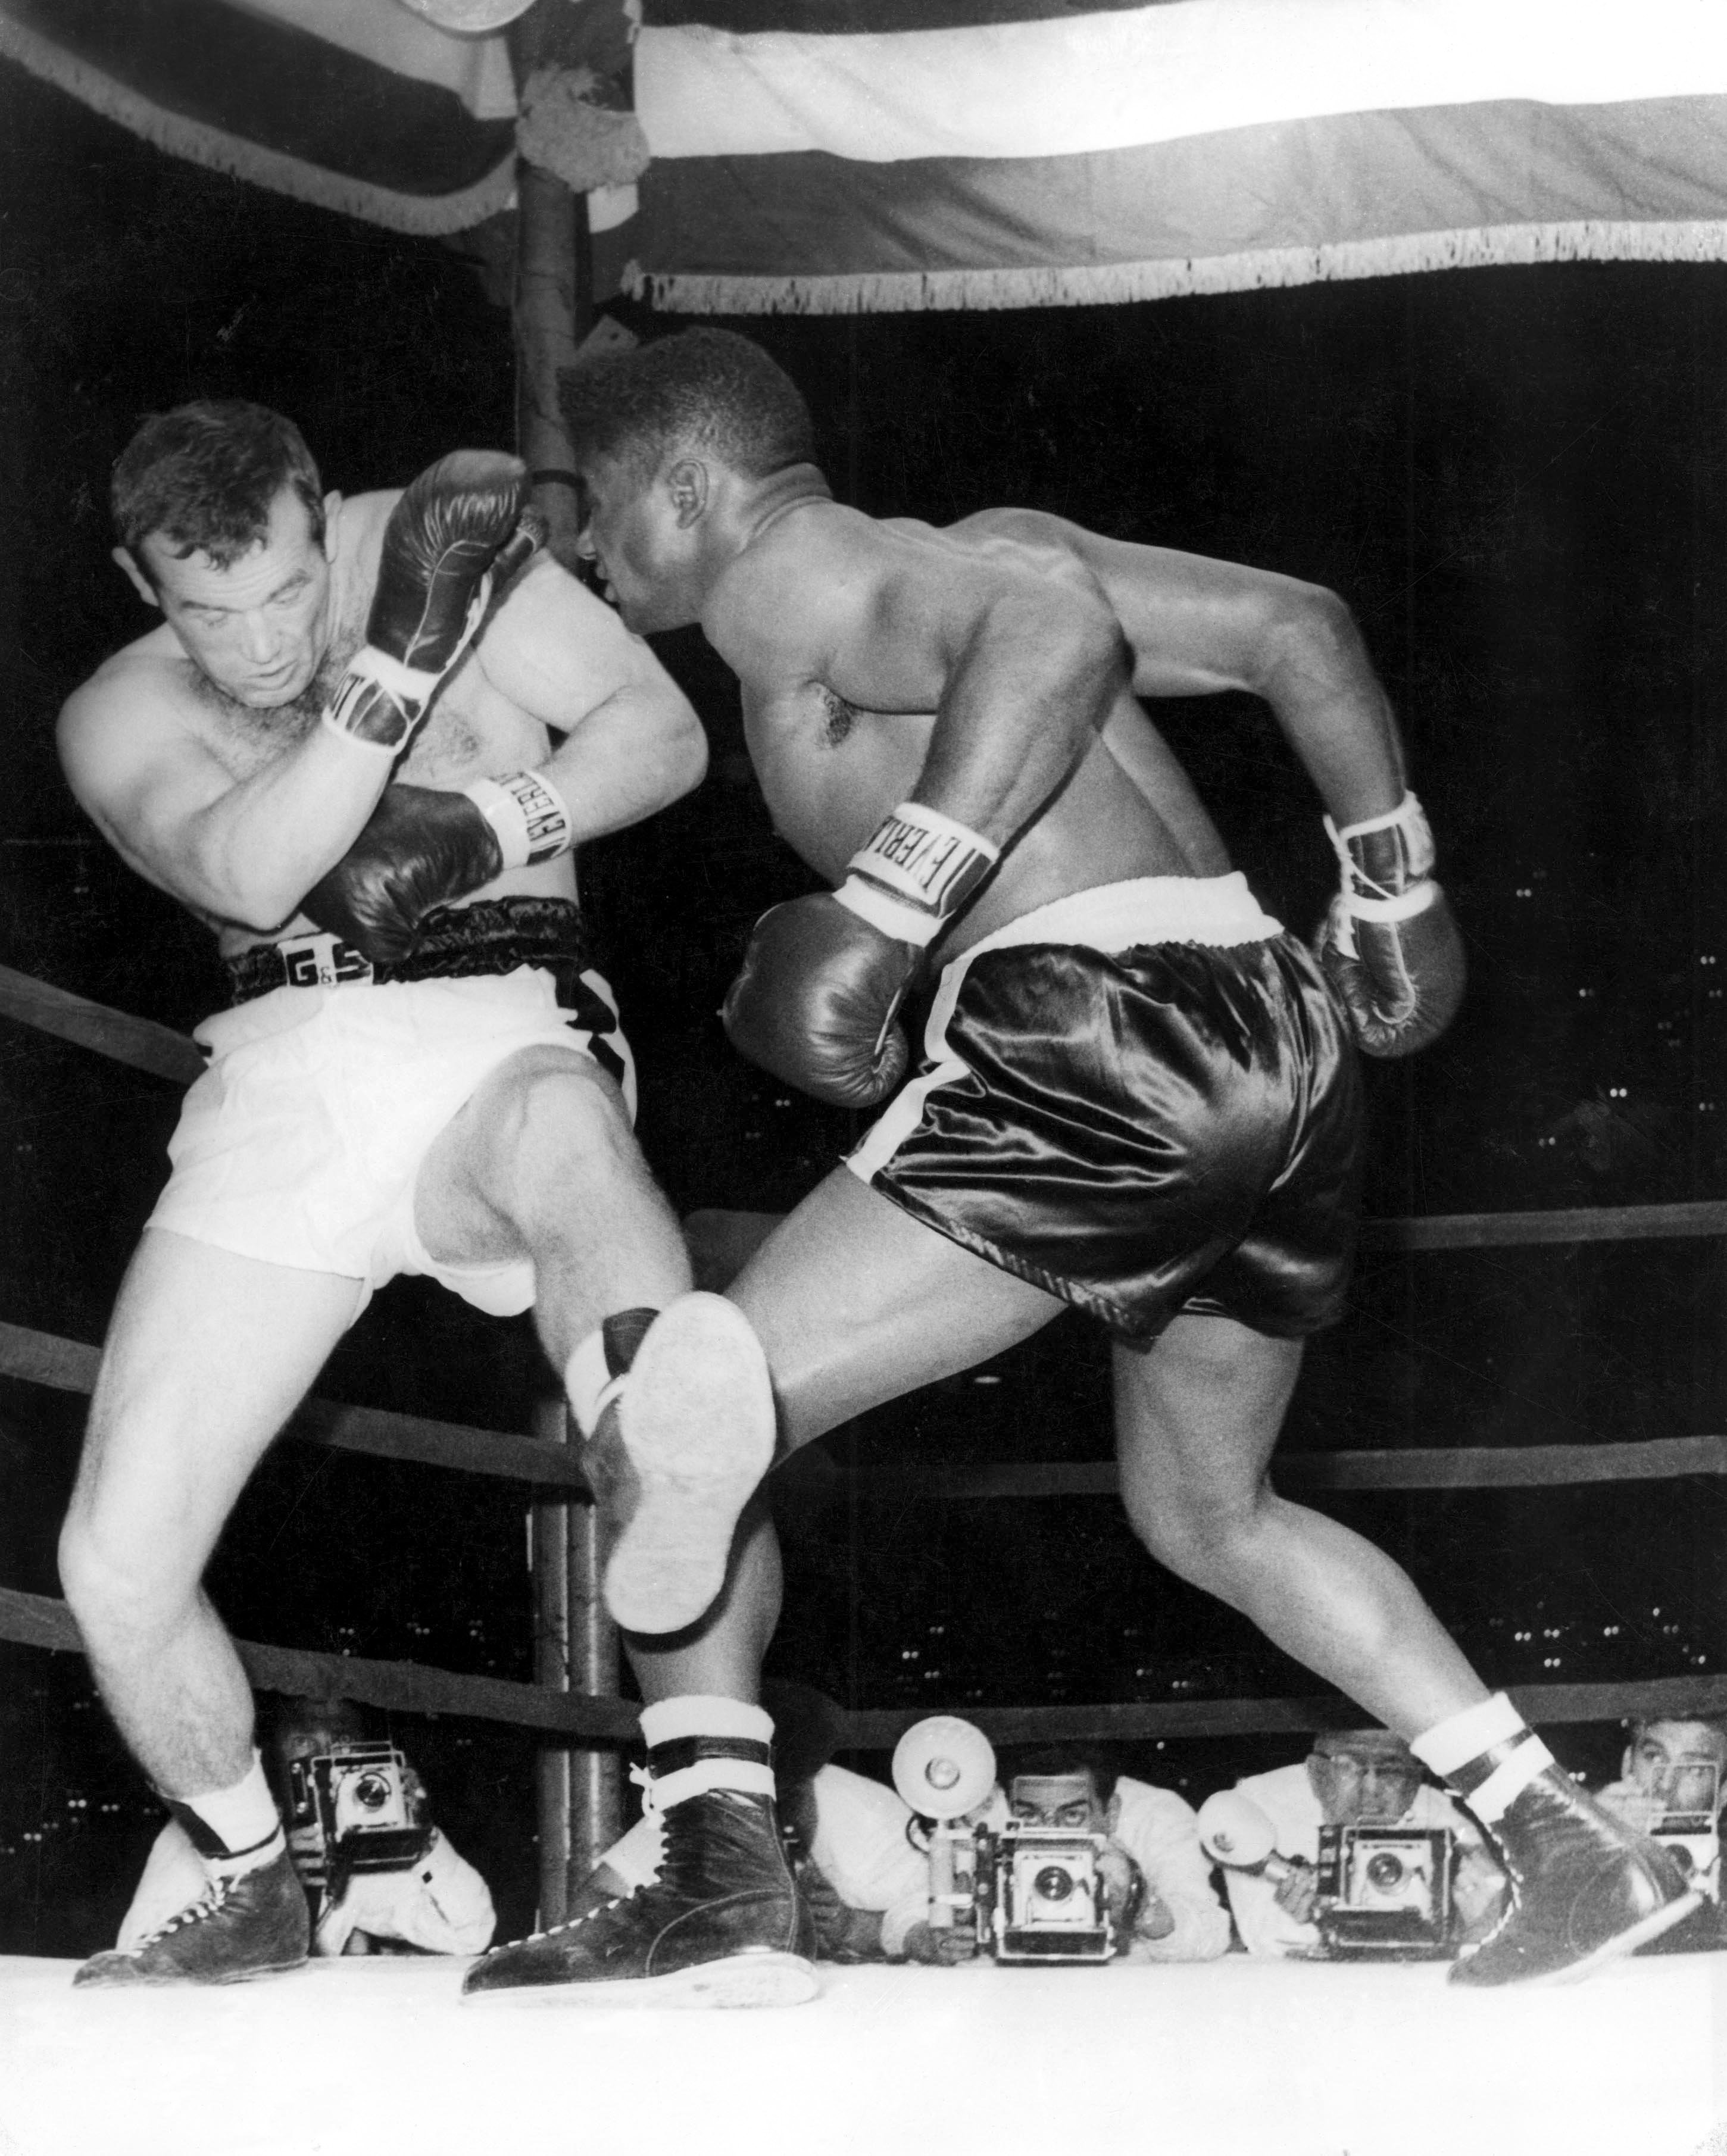 By knocking out world heavyweight boxing champion, Swedish Ingemar Johansson, in the fifth round of their title fight in New York, 25-year-old Floyd Patterson, made history as the only heavyweight champion of the world to regain his lost title. The fight was a complete reversal of the contest last June when Johansson, then the challenger, finished the fight and claimed the title in three rounds. Picture shows Johansson, forced against the ropes by Patterson's pushes, uses weird, unorthodox footwork, as he tries in vain to move away. 23rd June 1960